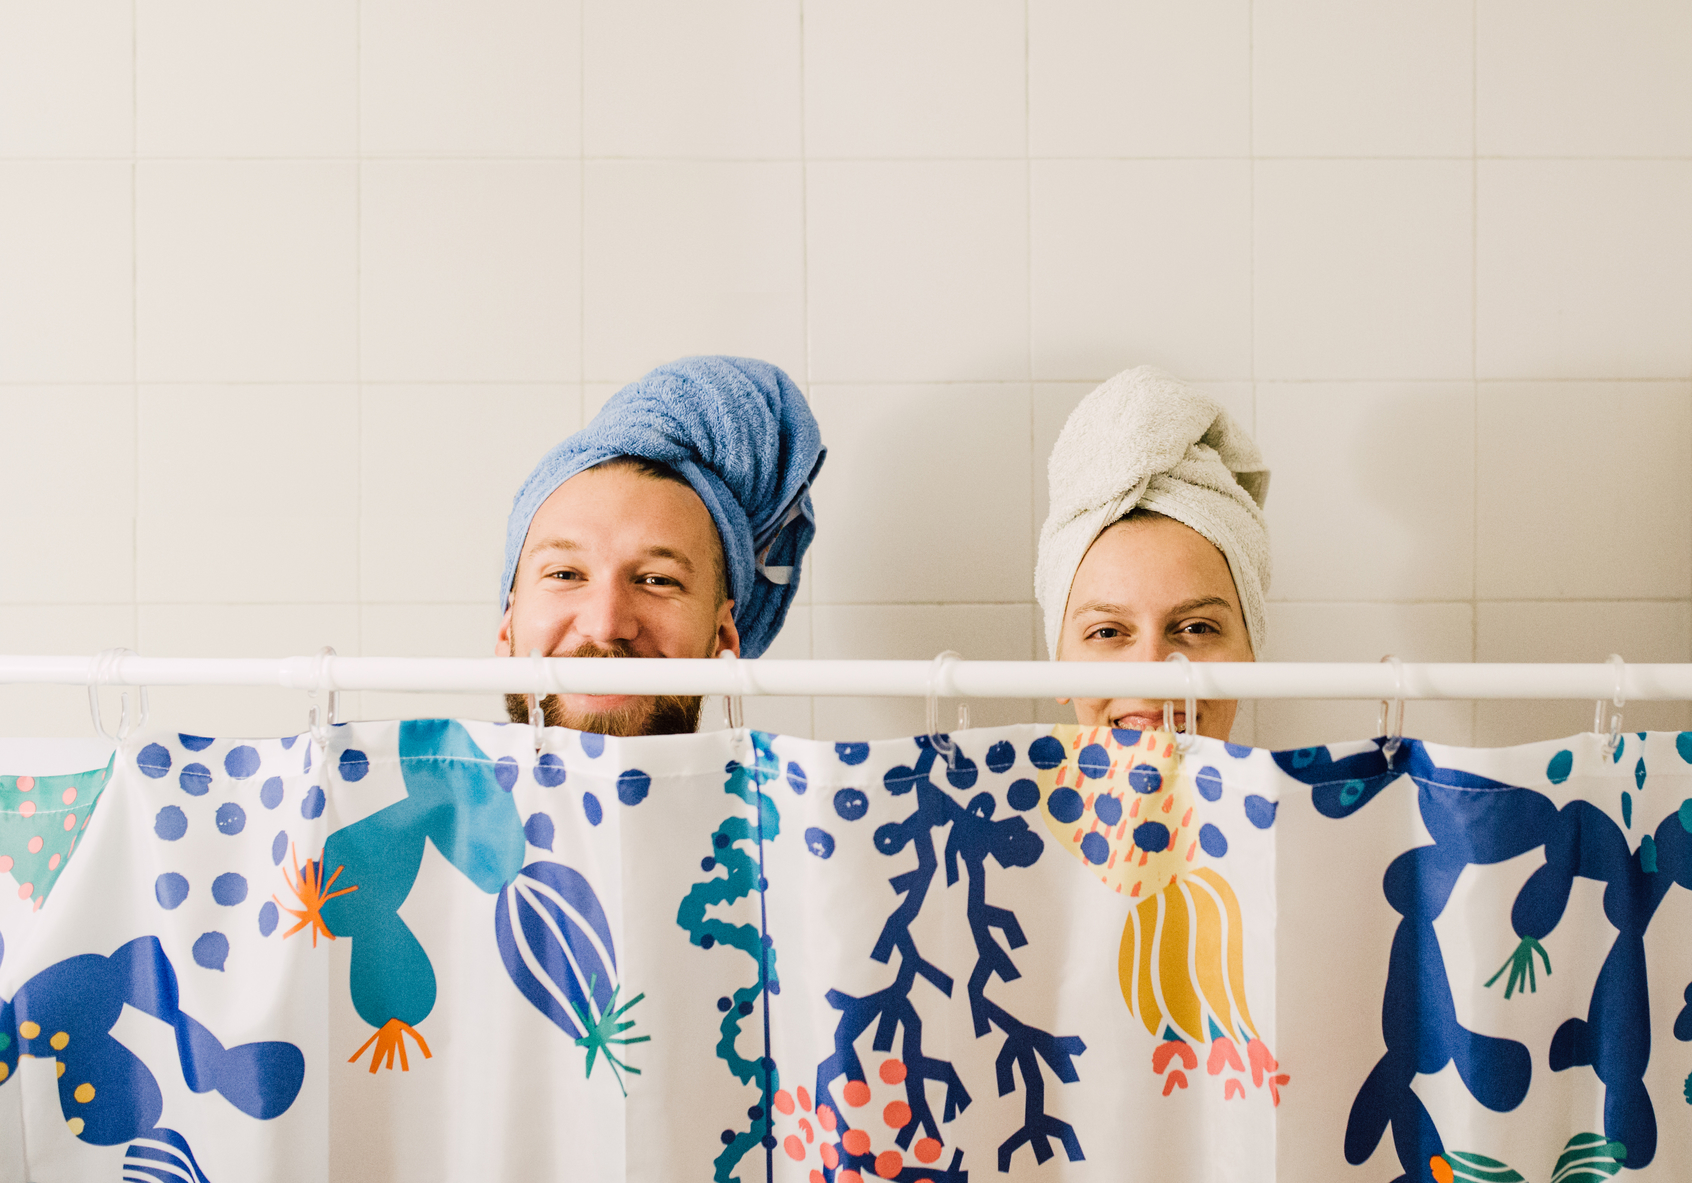 man and woman, each with their hair wrapped up in a towel, are peeking above a shower curtain